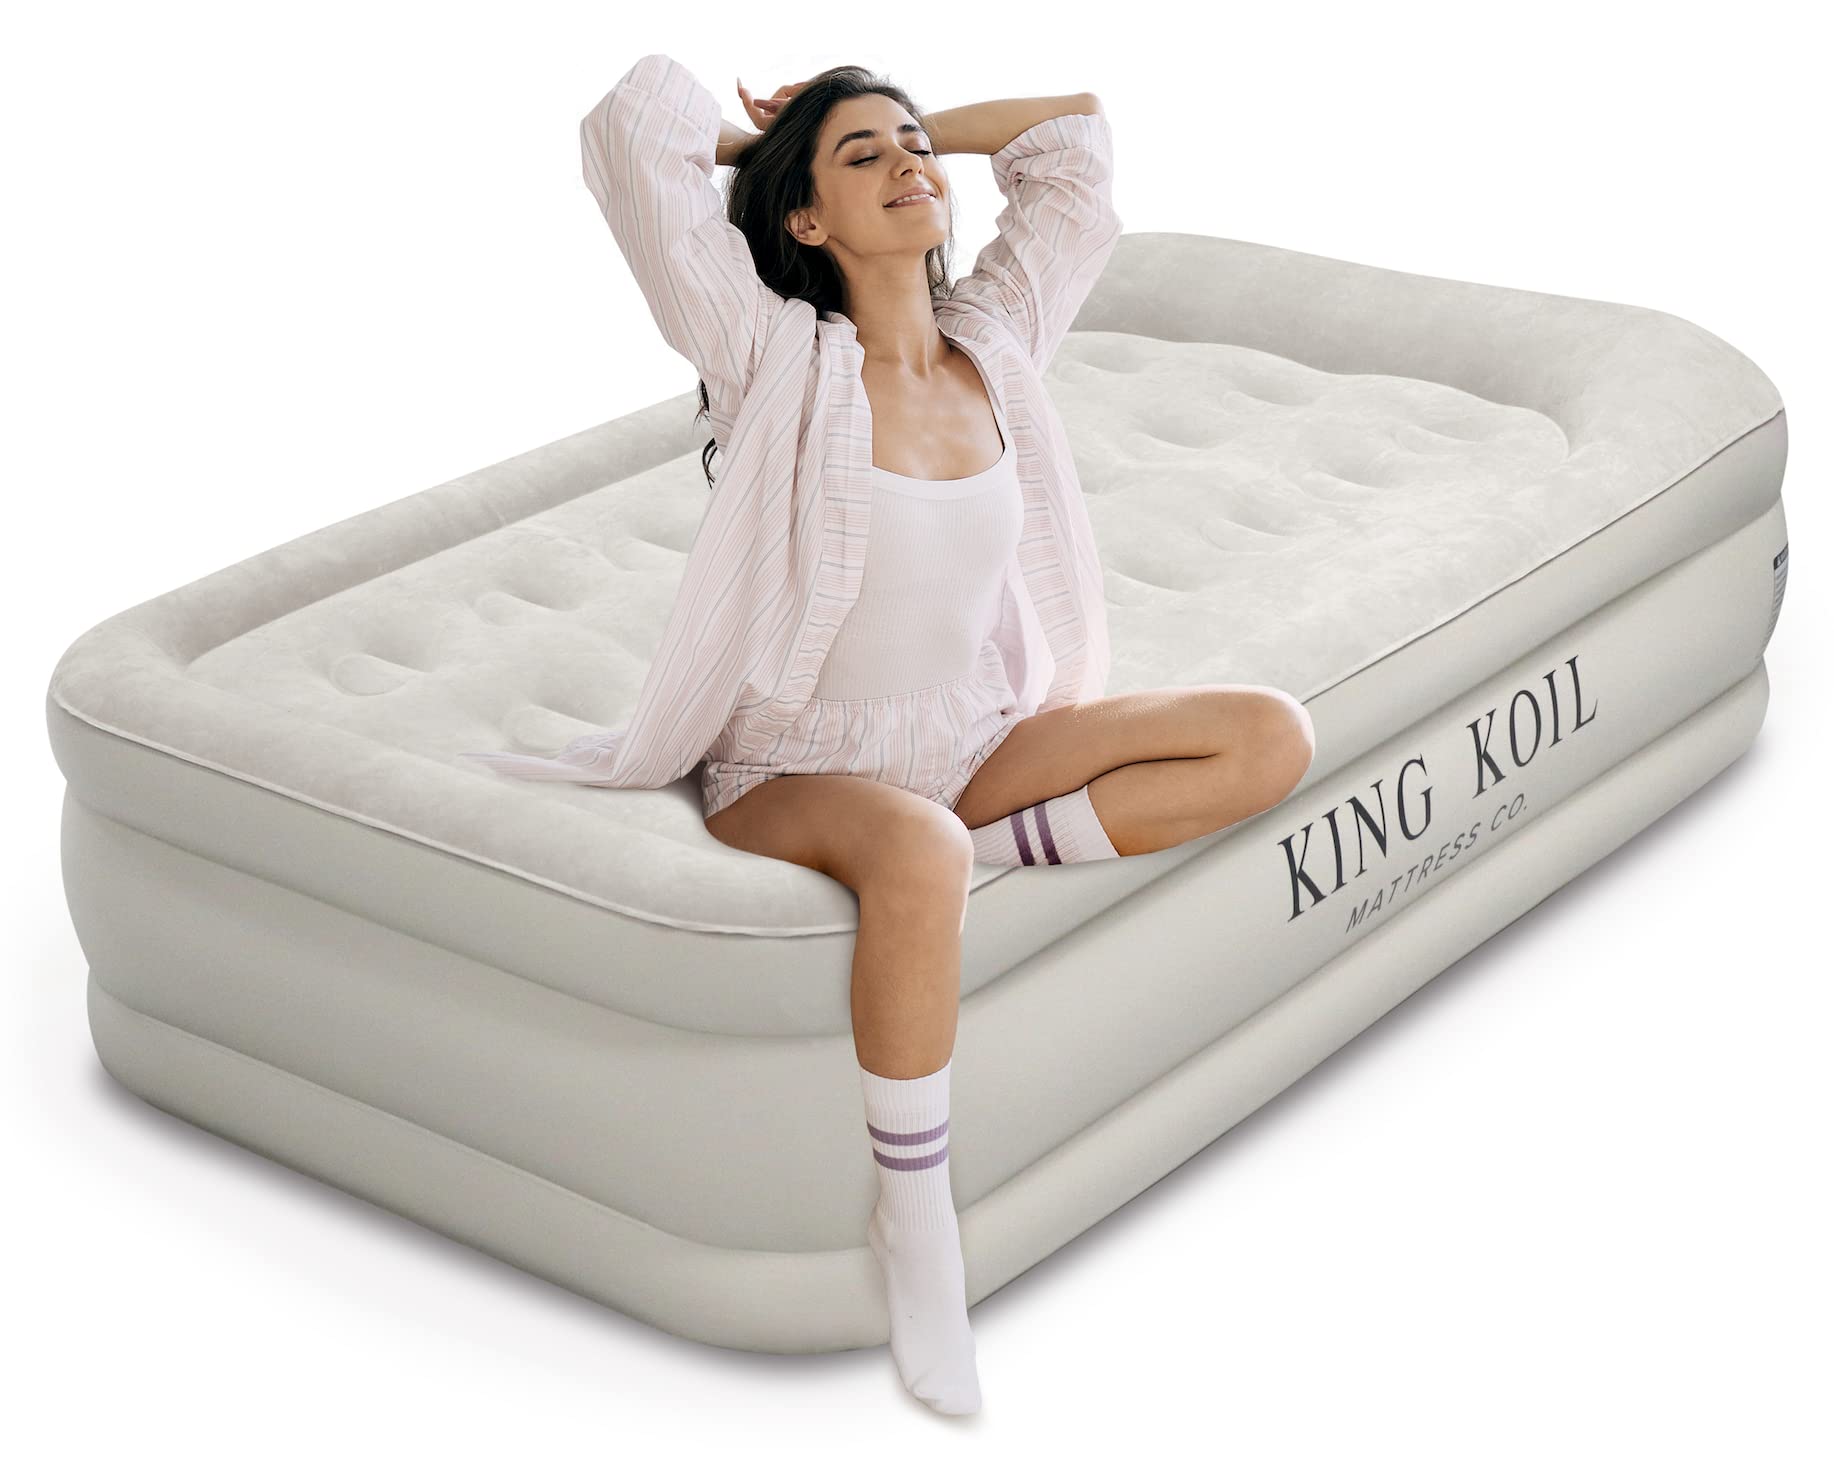 King Koil Twin Air Mattress with Built-in Pump - Double High Elevated Raised Airbed for Guests with Comfortable Top Inflatable B